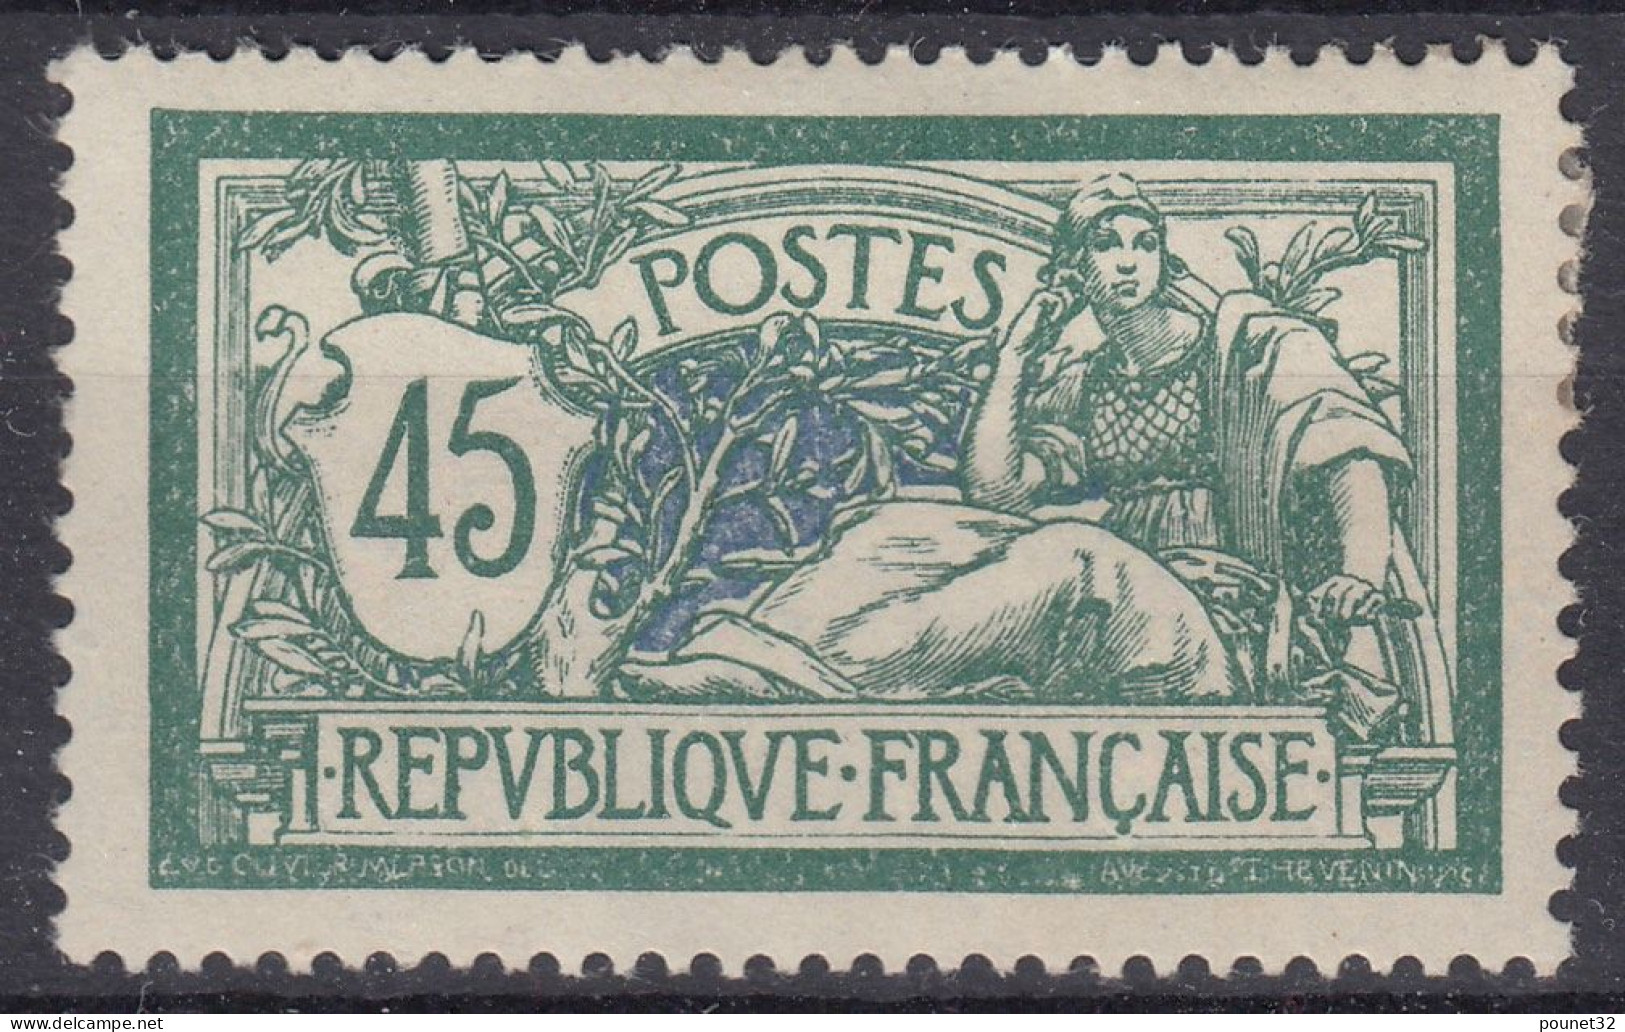 TIMBRE FRANCE MERSON 45c N° 143 NEUF * GOMME AVEC CHARNIERE ETENDUE - 1900-27 Merson